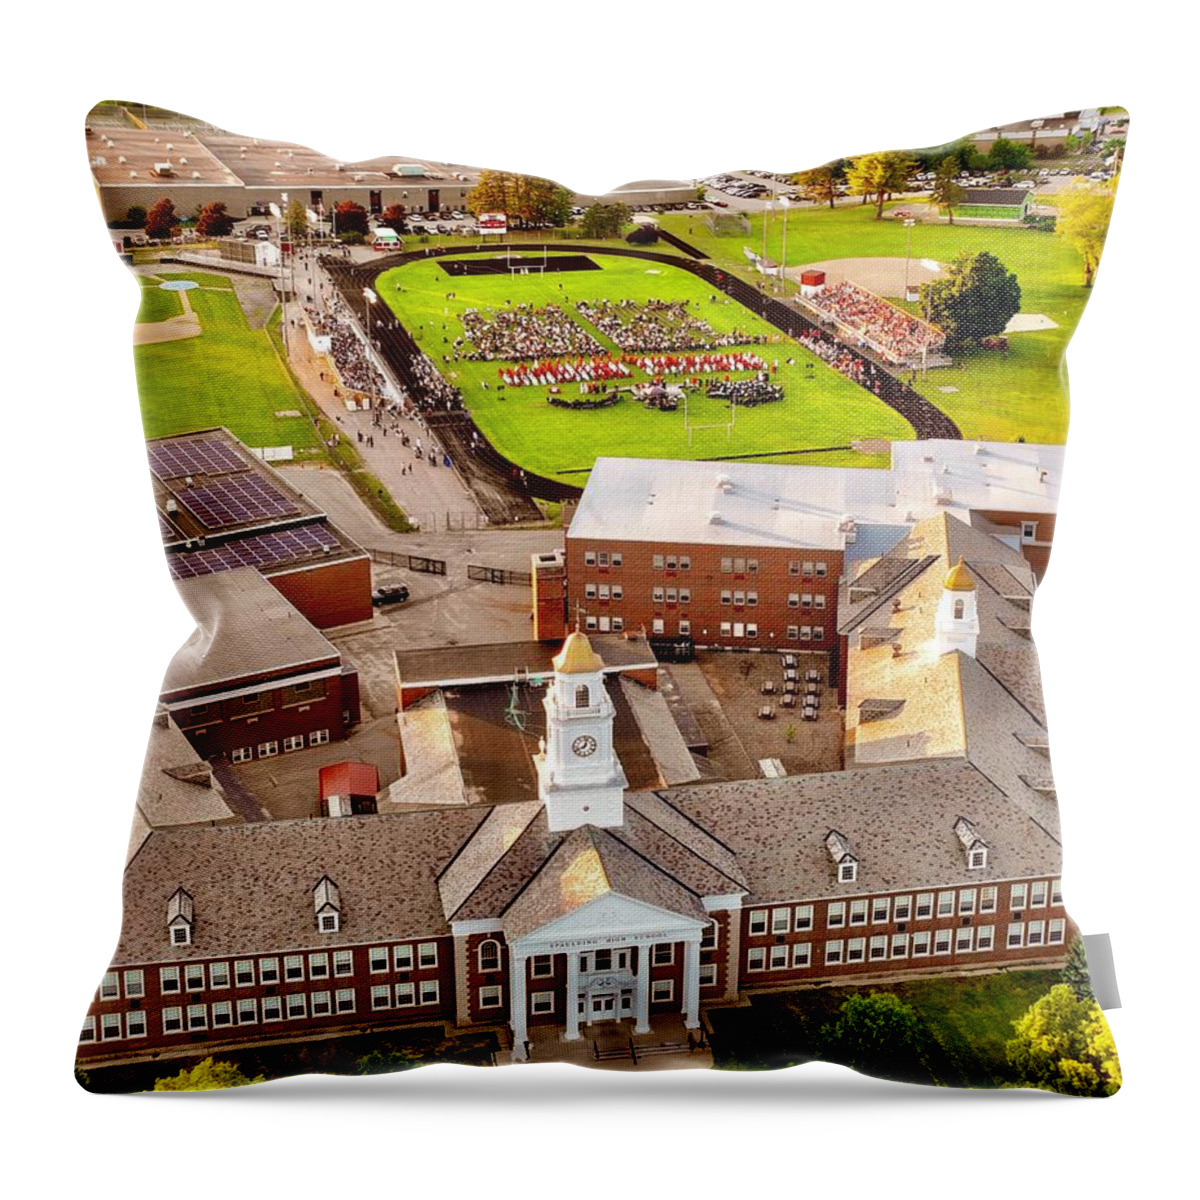  Throw Pillow featuring the photograph Graduation at Spaulding High School by John Gisis